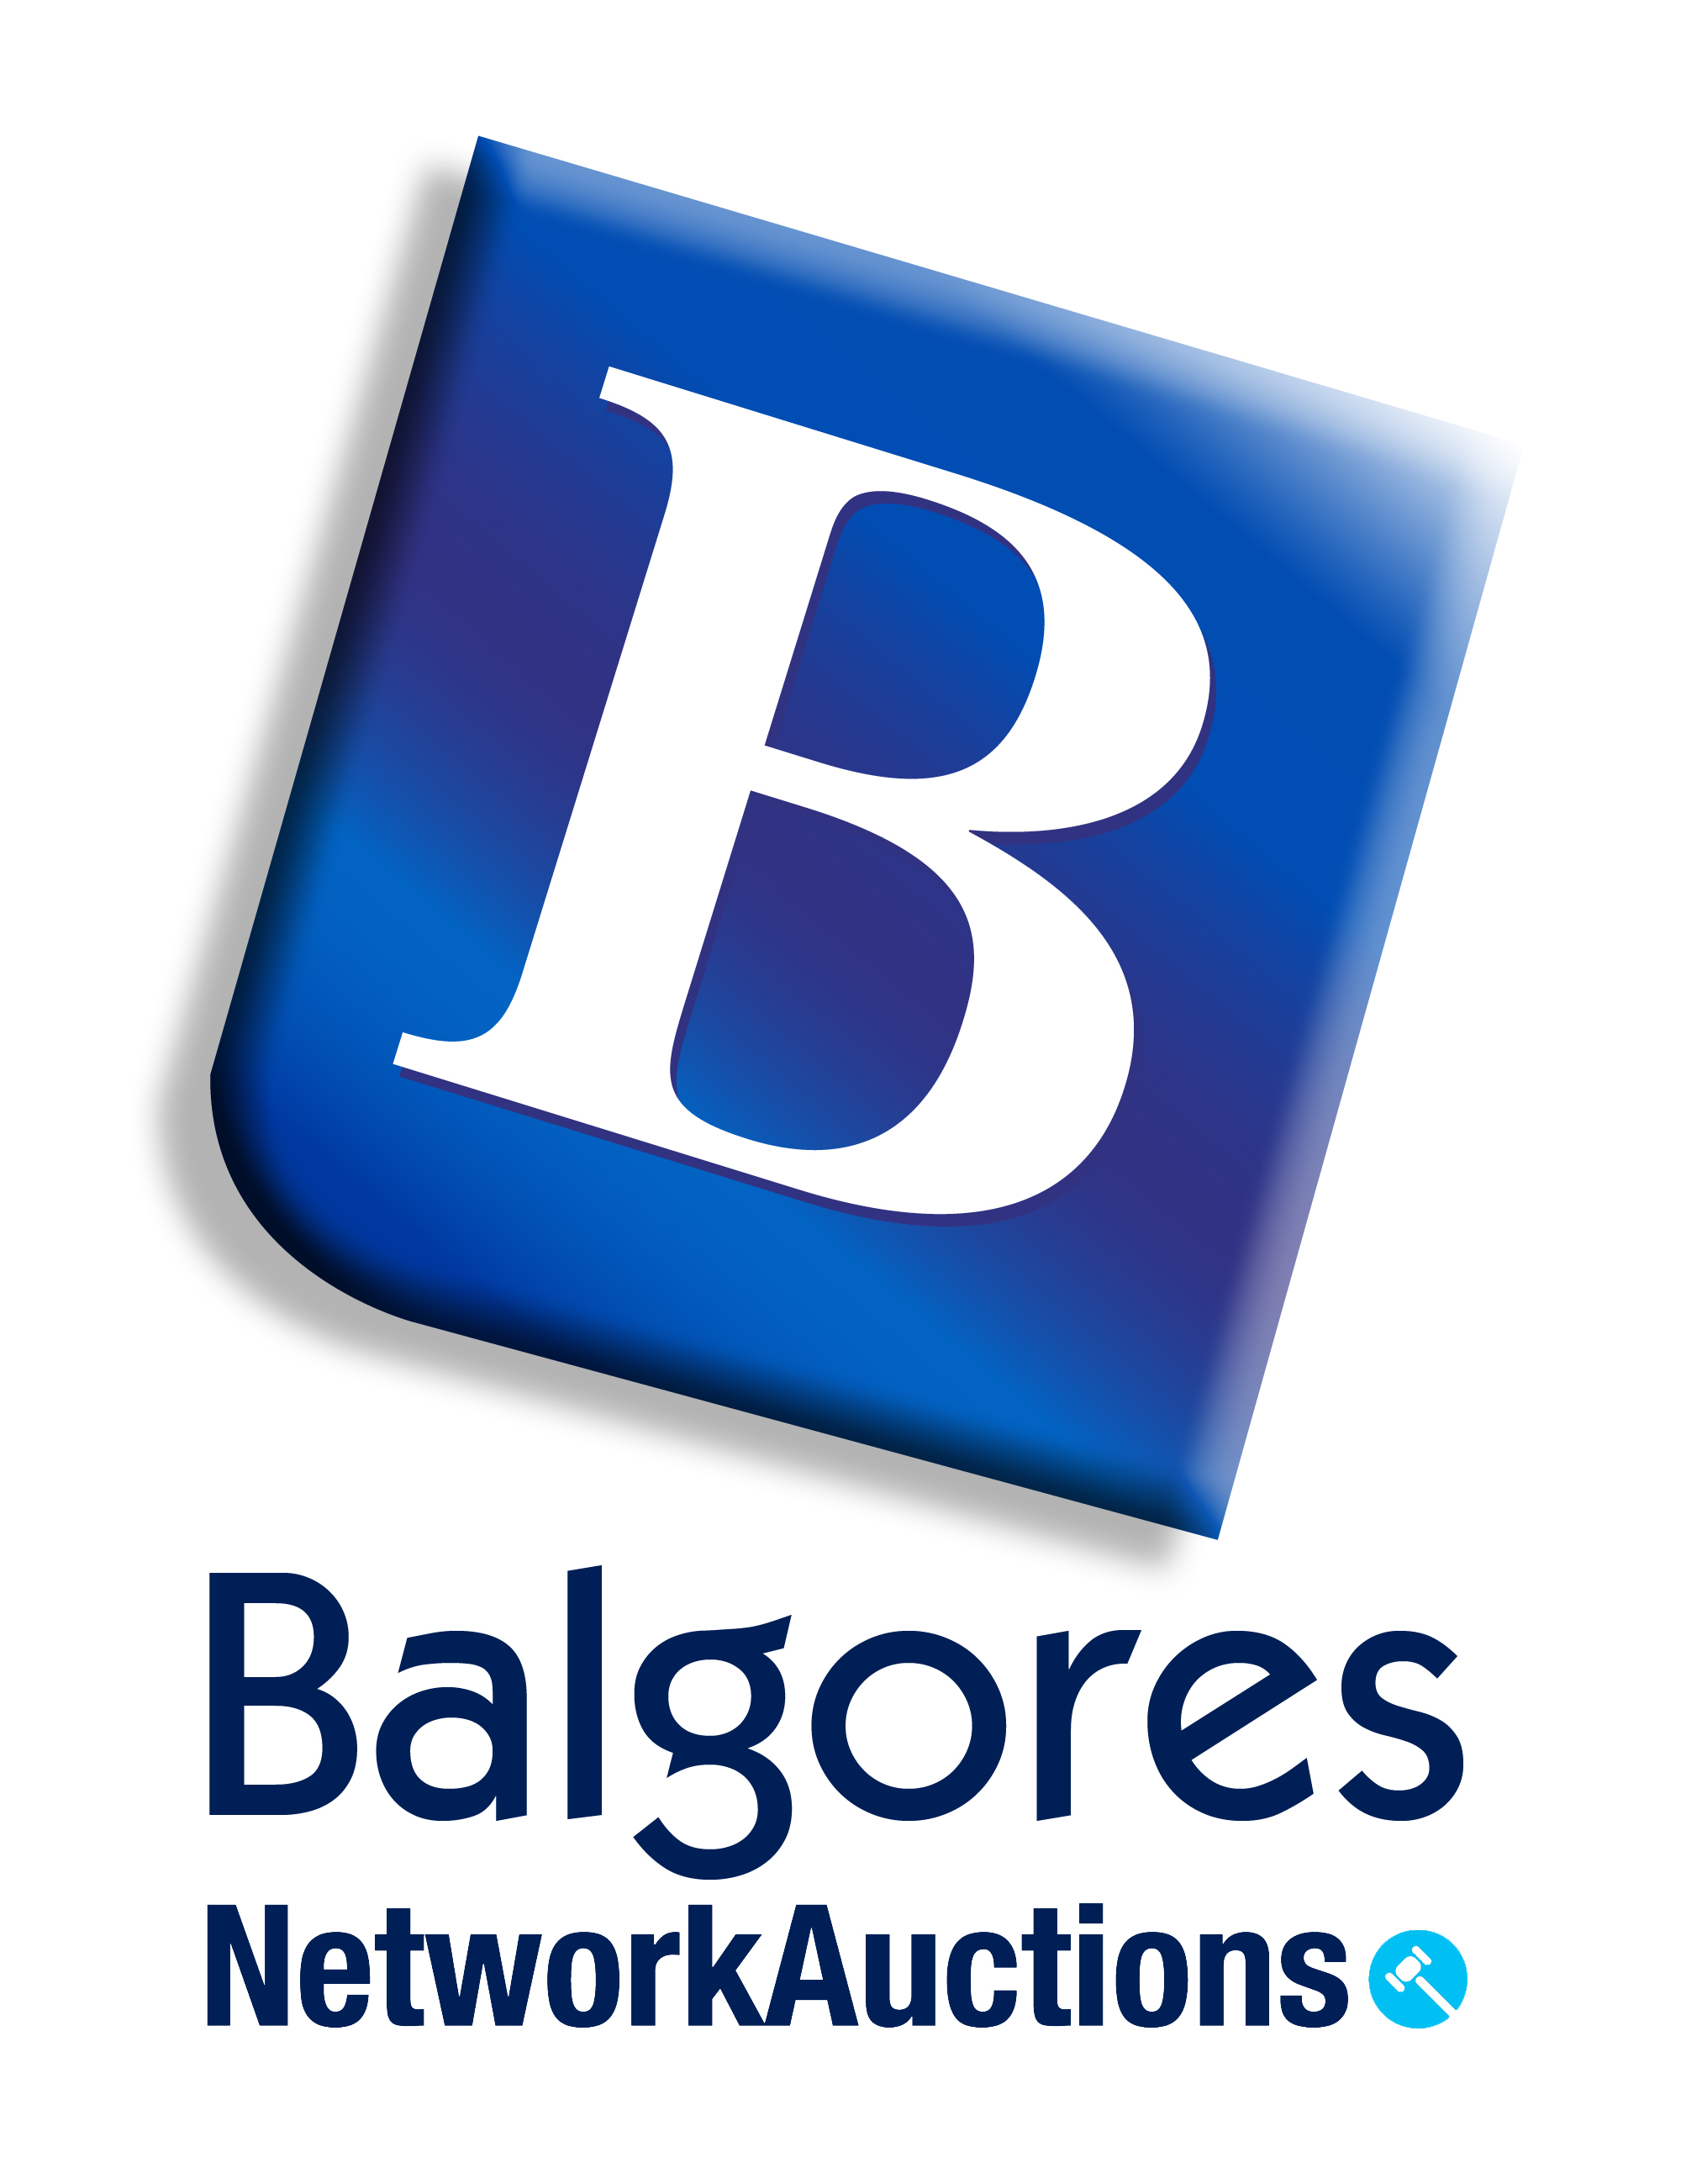 Please contact Balgores Network Auctions on 01708 755507